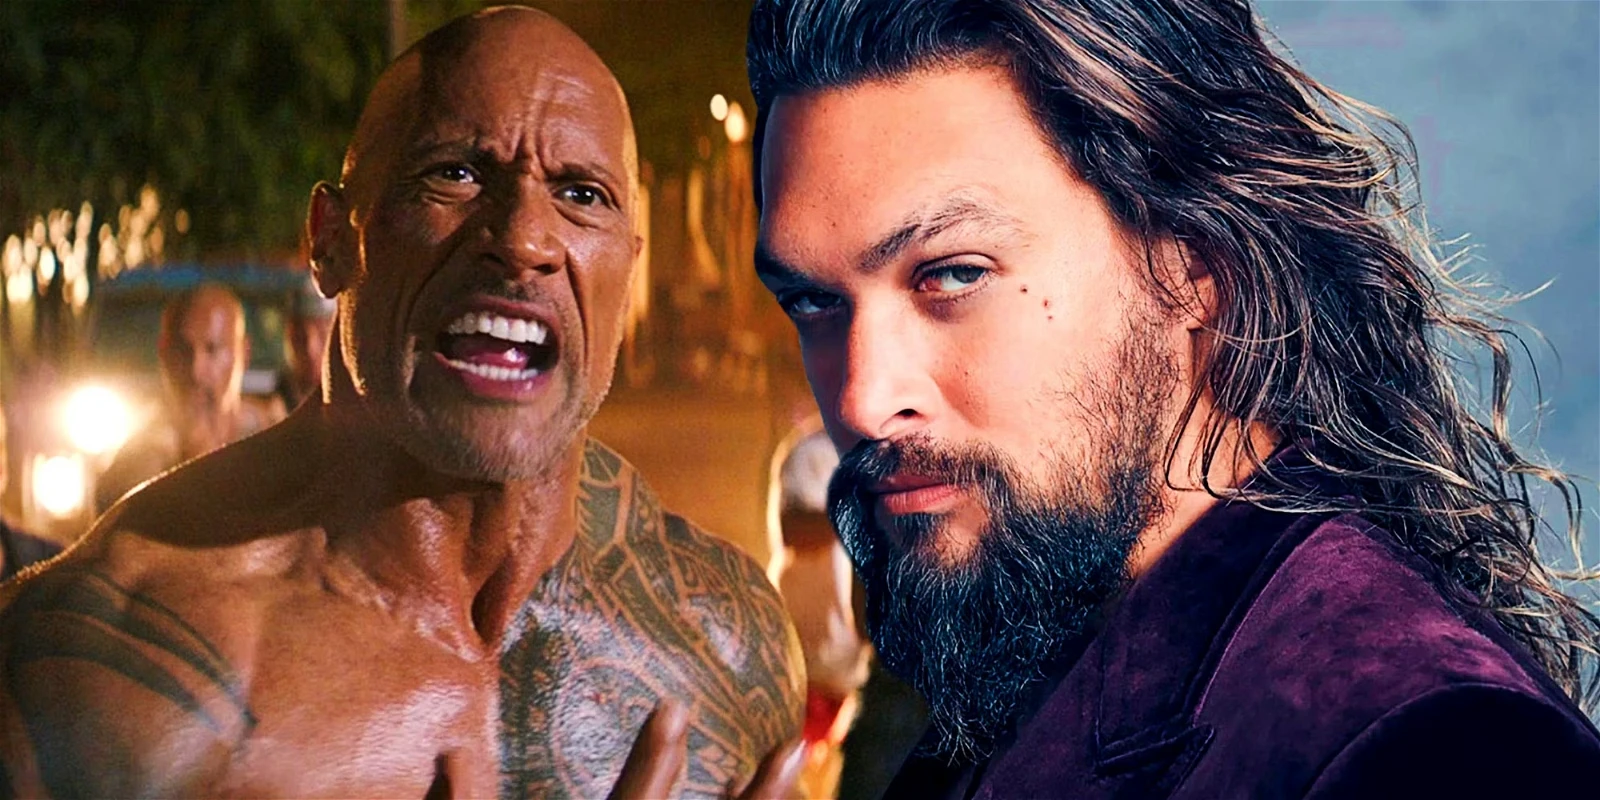 Jason Momoa and Dwayne Johnson to star together in the next Fast X